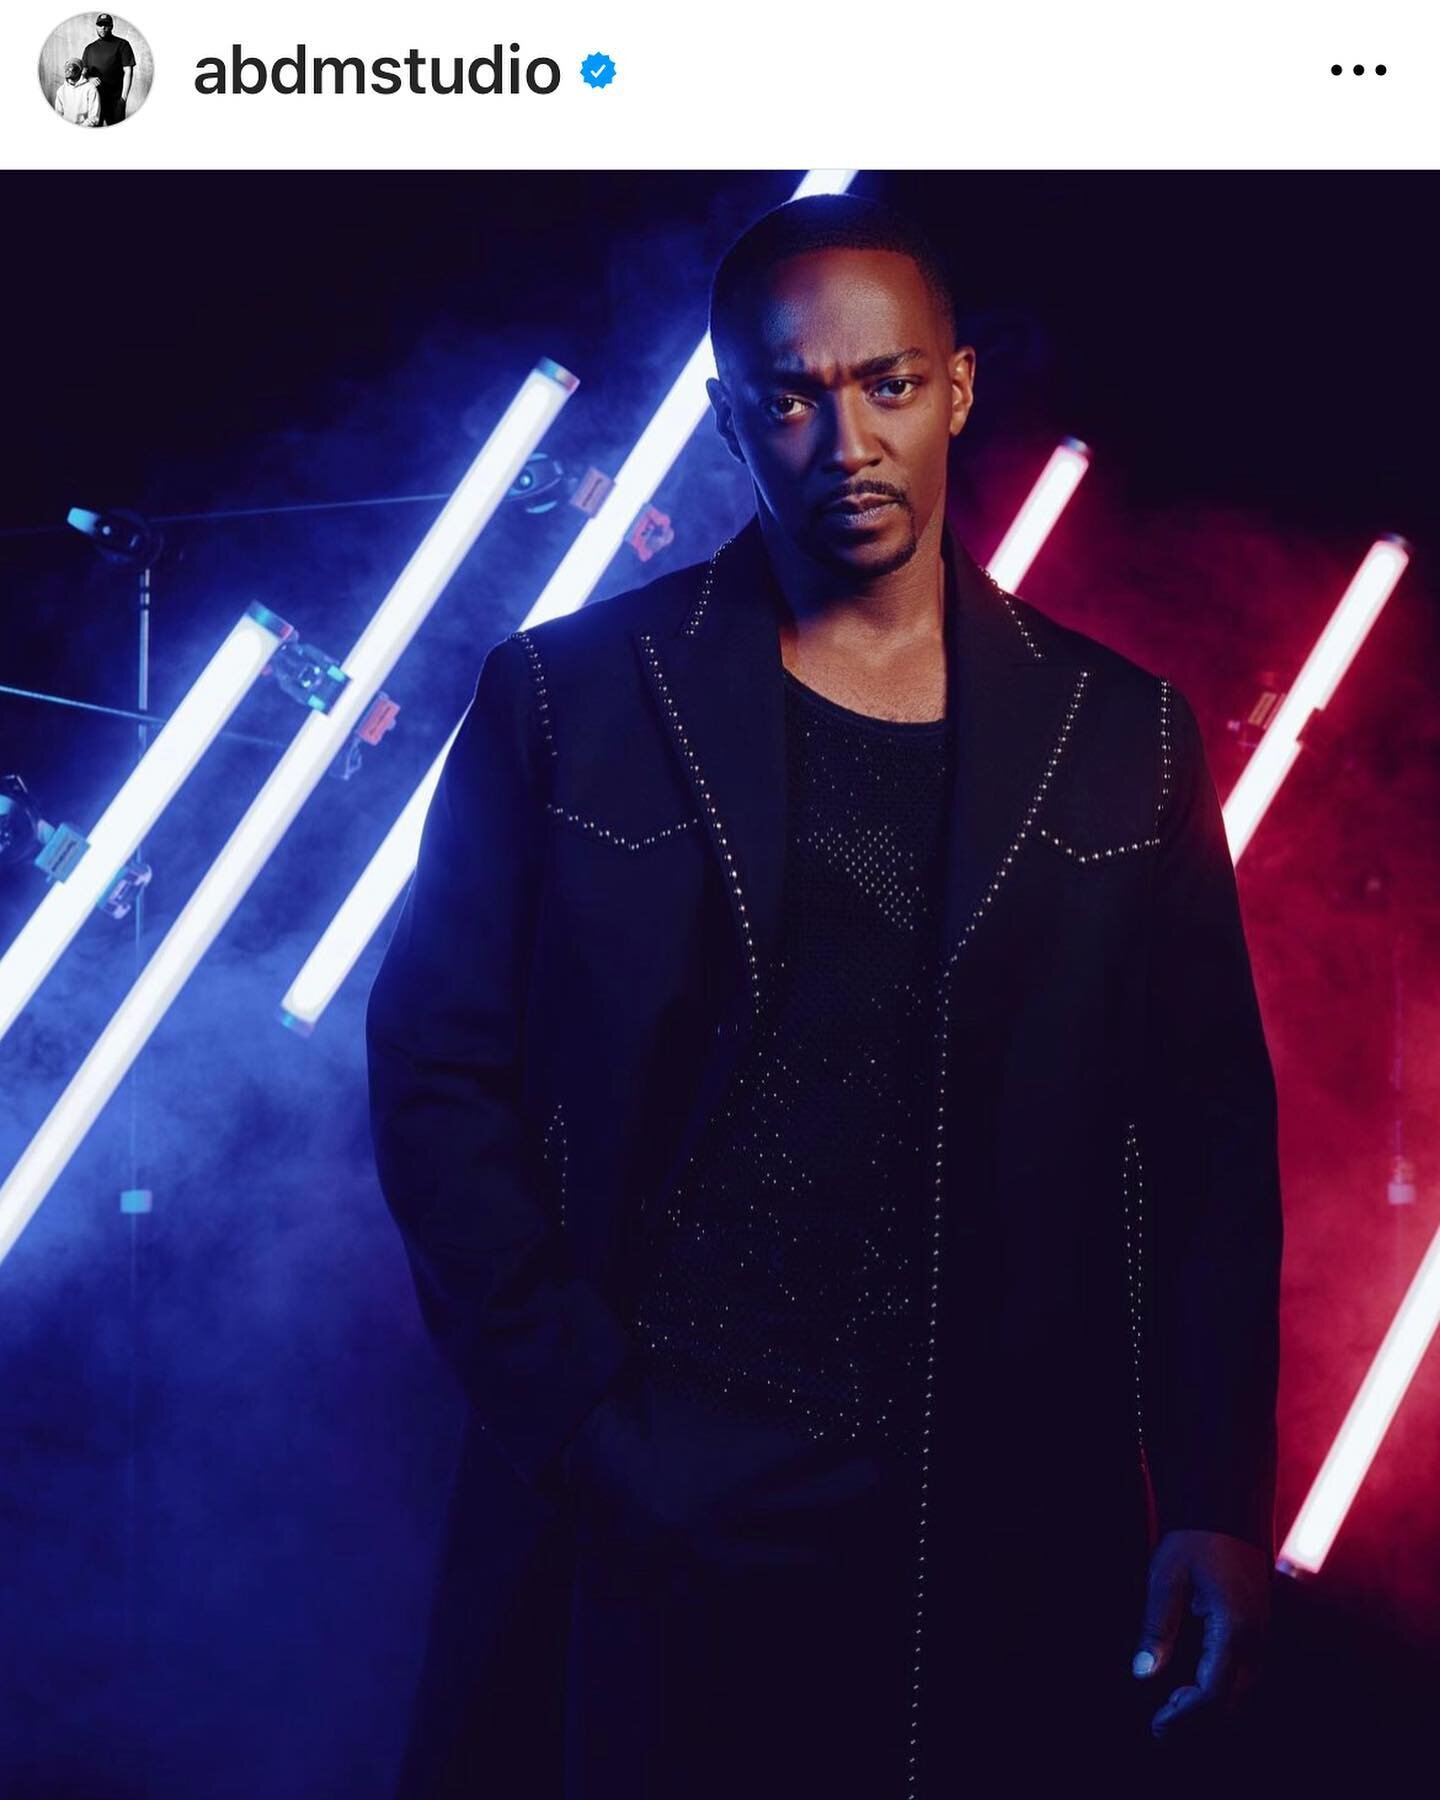 #weseeterminusgear
the amazing @abdmstudio using lights as props with @anthonymackie 
#productionsupport